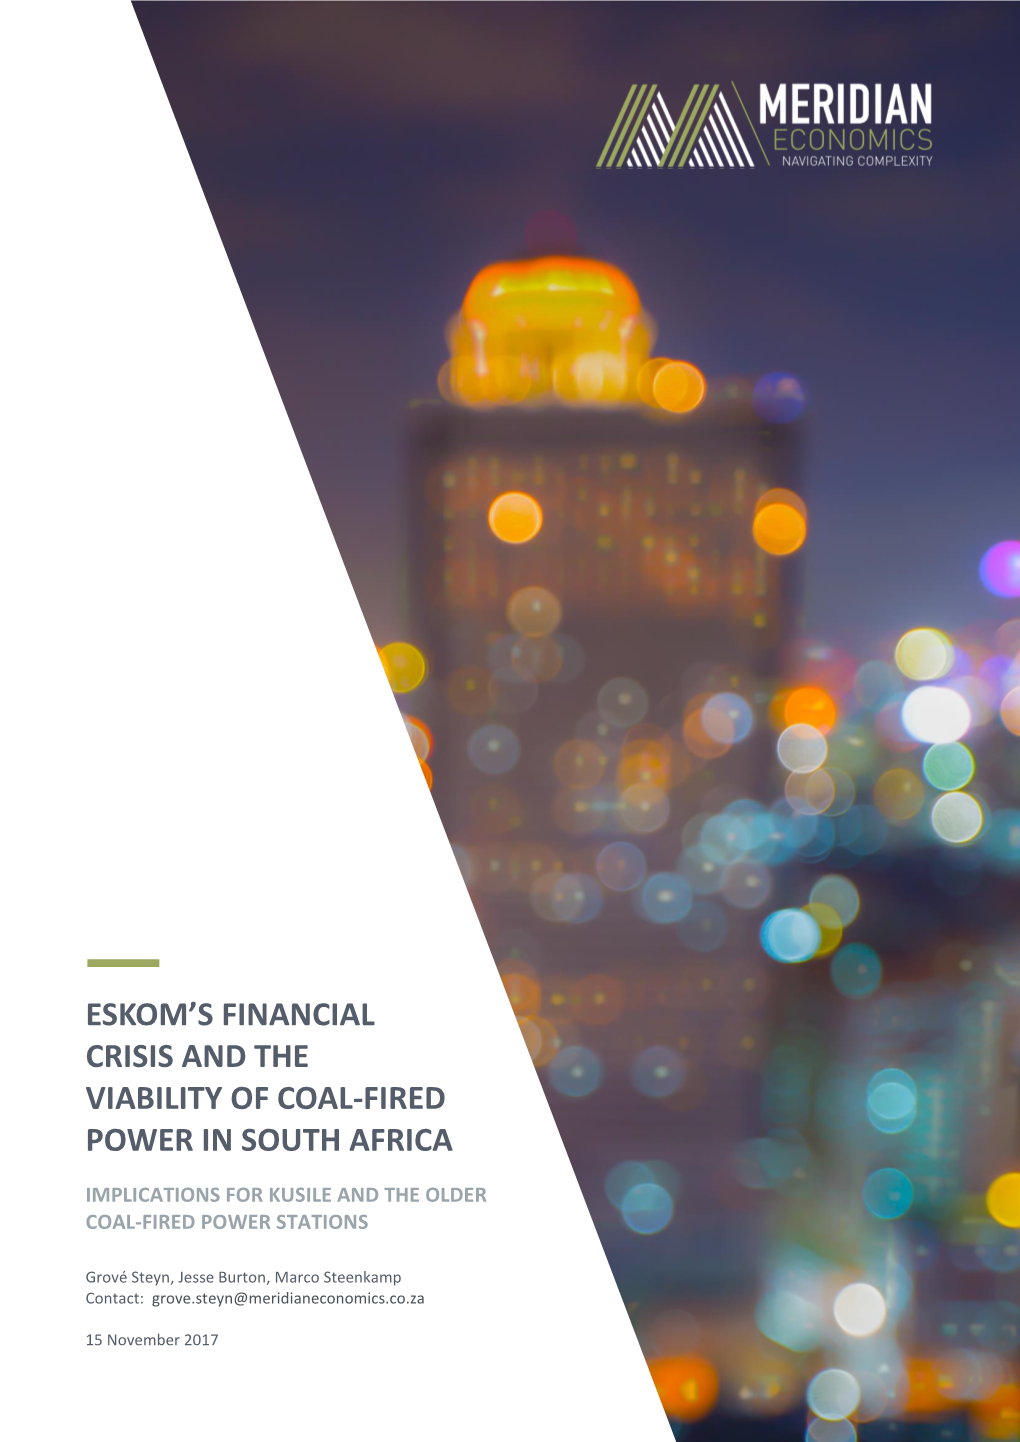 Eskom's Financial Crisis and the Viability of Coal-Fired Power in South